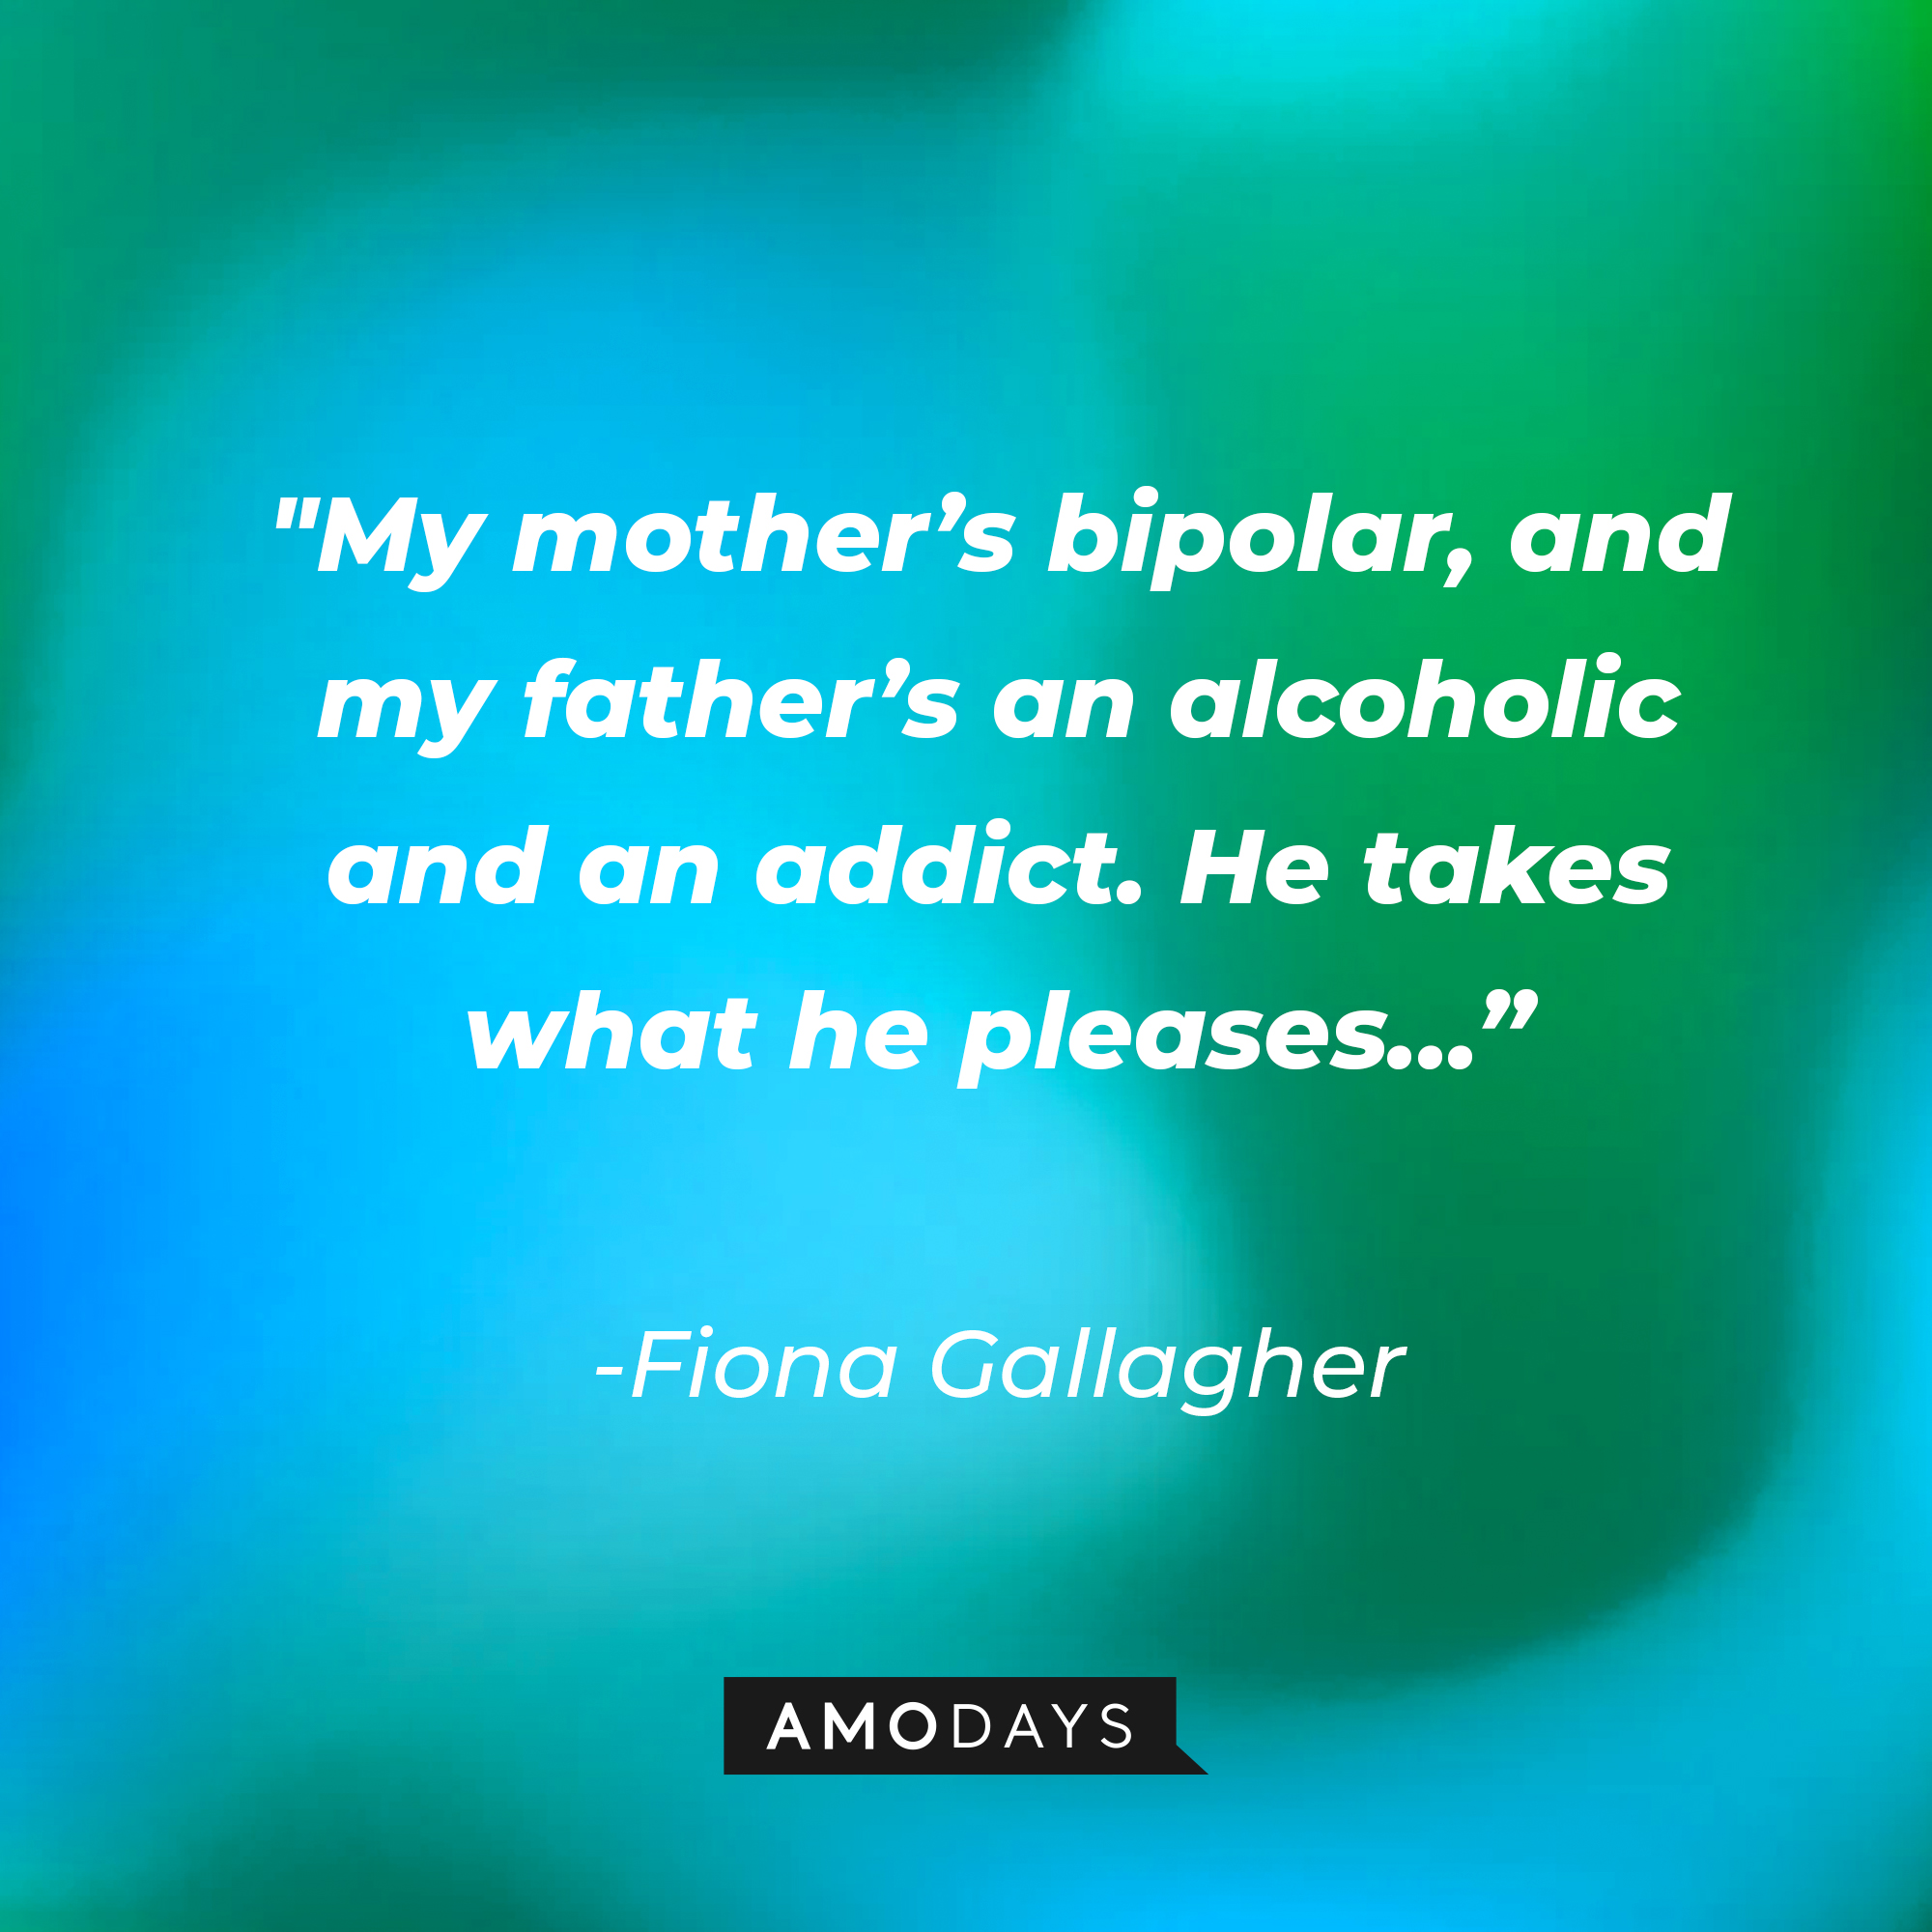 Fiona Gallagher’s quote: "My mother’s bipolar, and my father’s an alcoholic and an addict. He takes what he pleases…” |Source: AmoDays